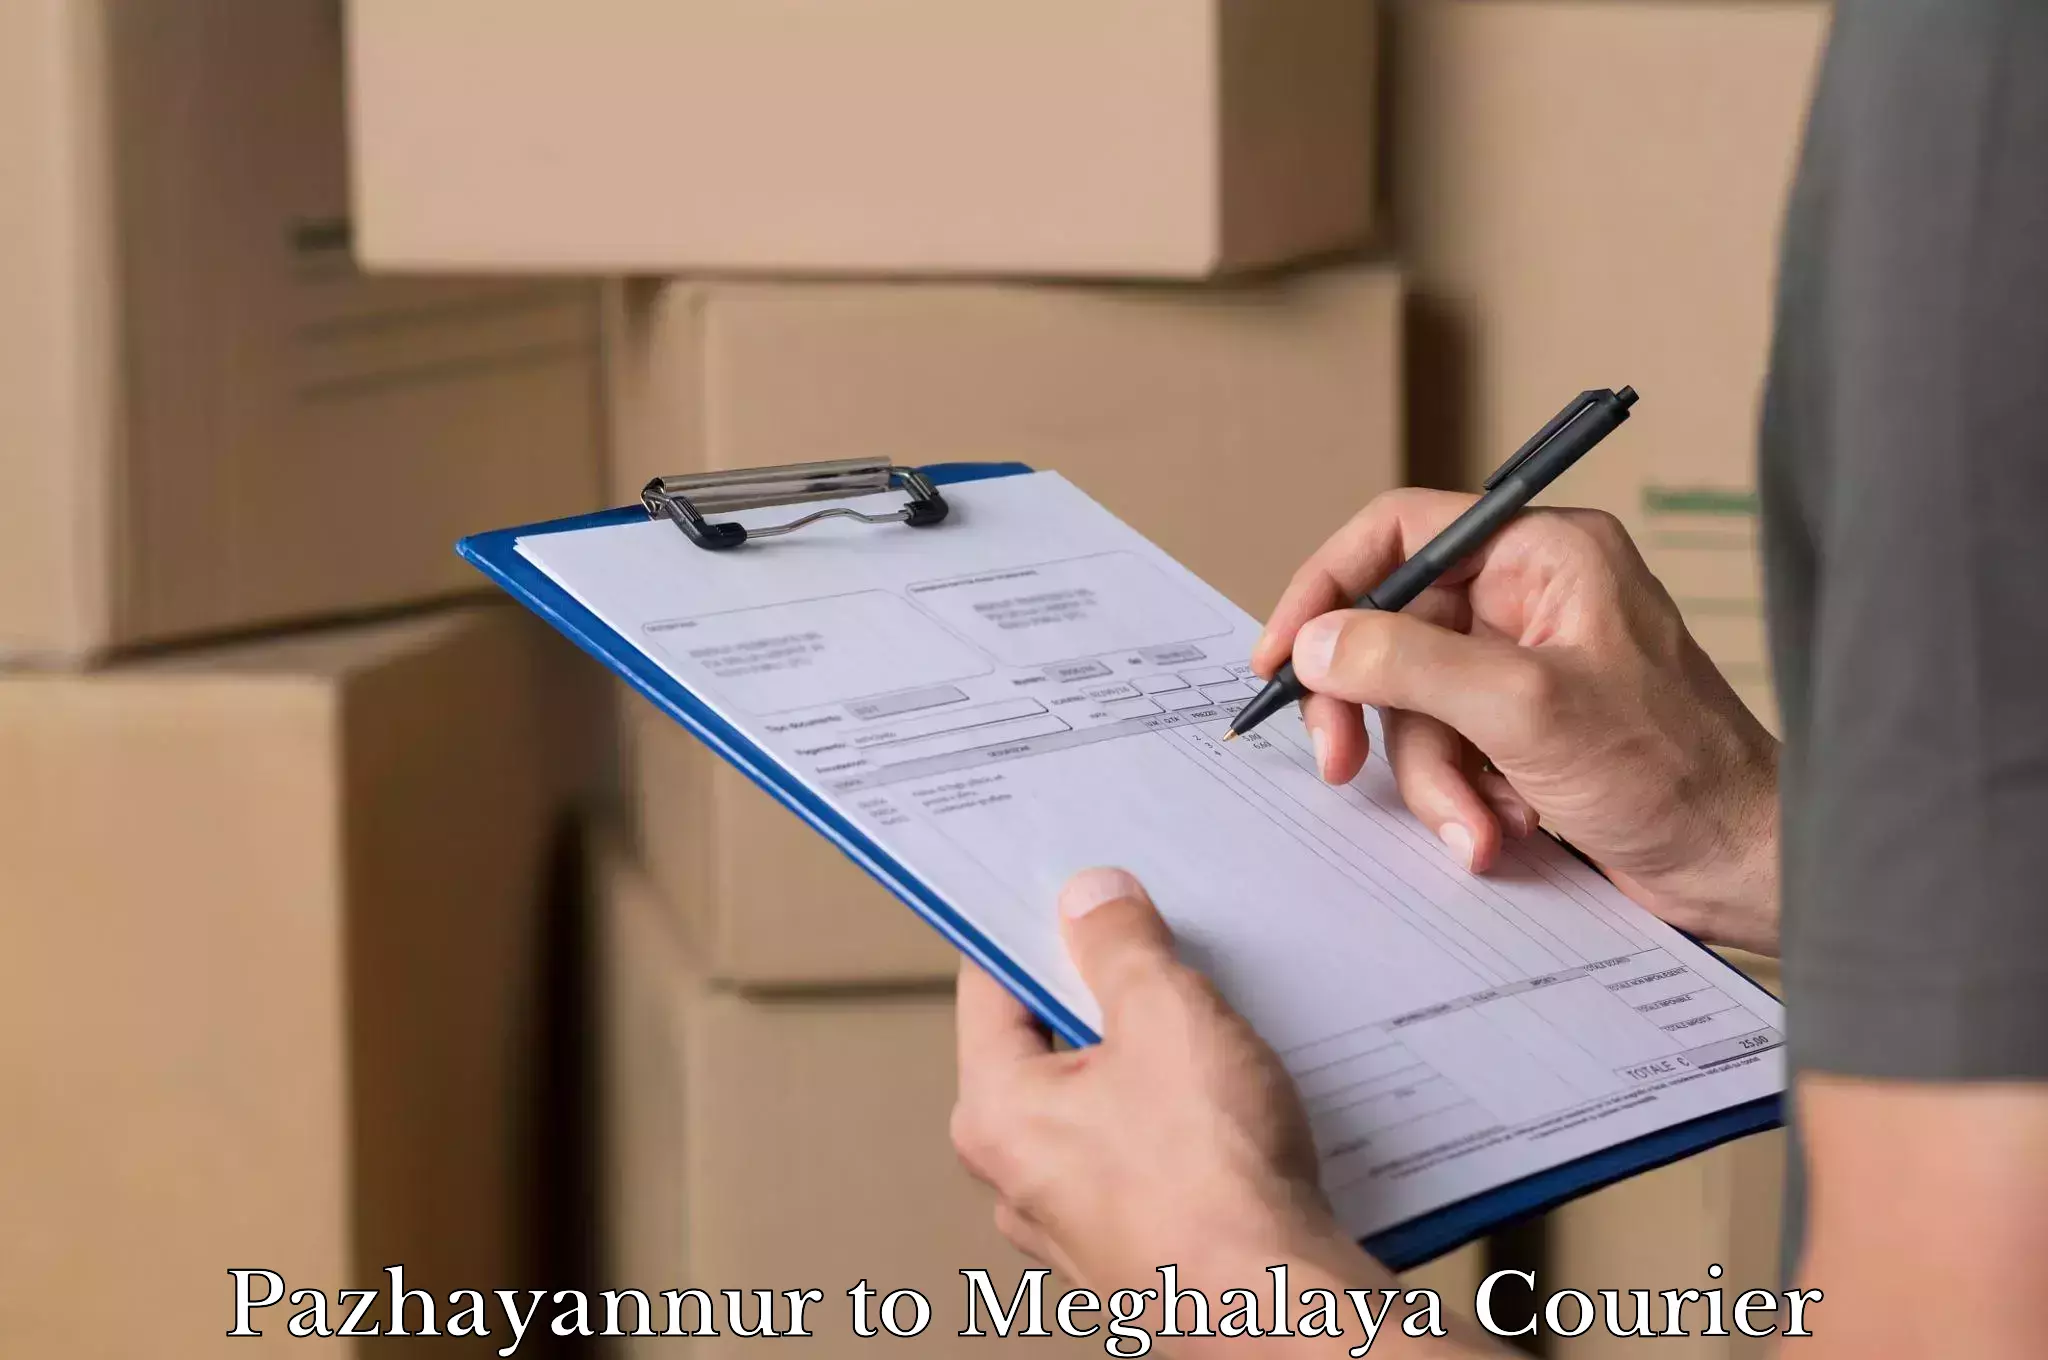 Luggage shipping specialists Pazhayannur to Meghalaya